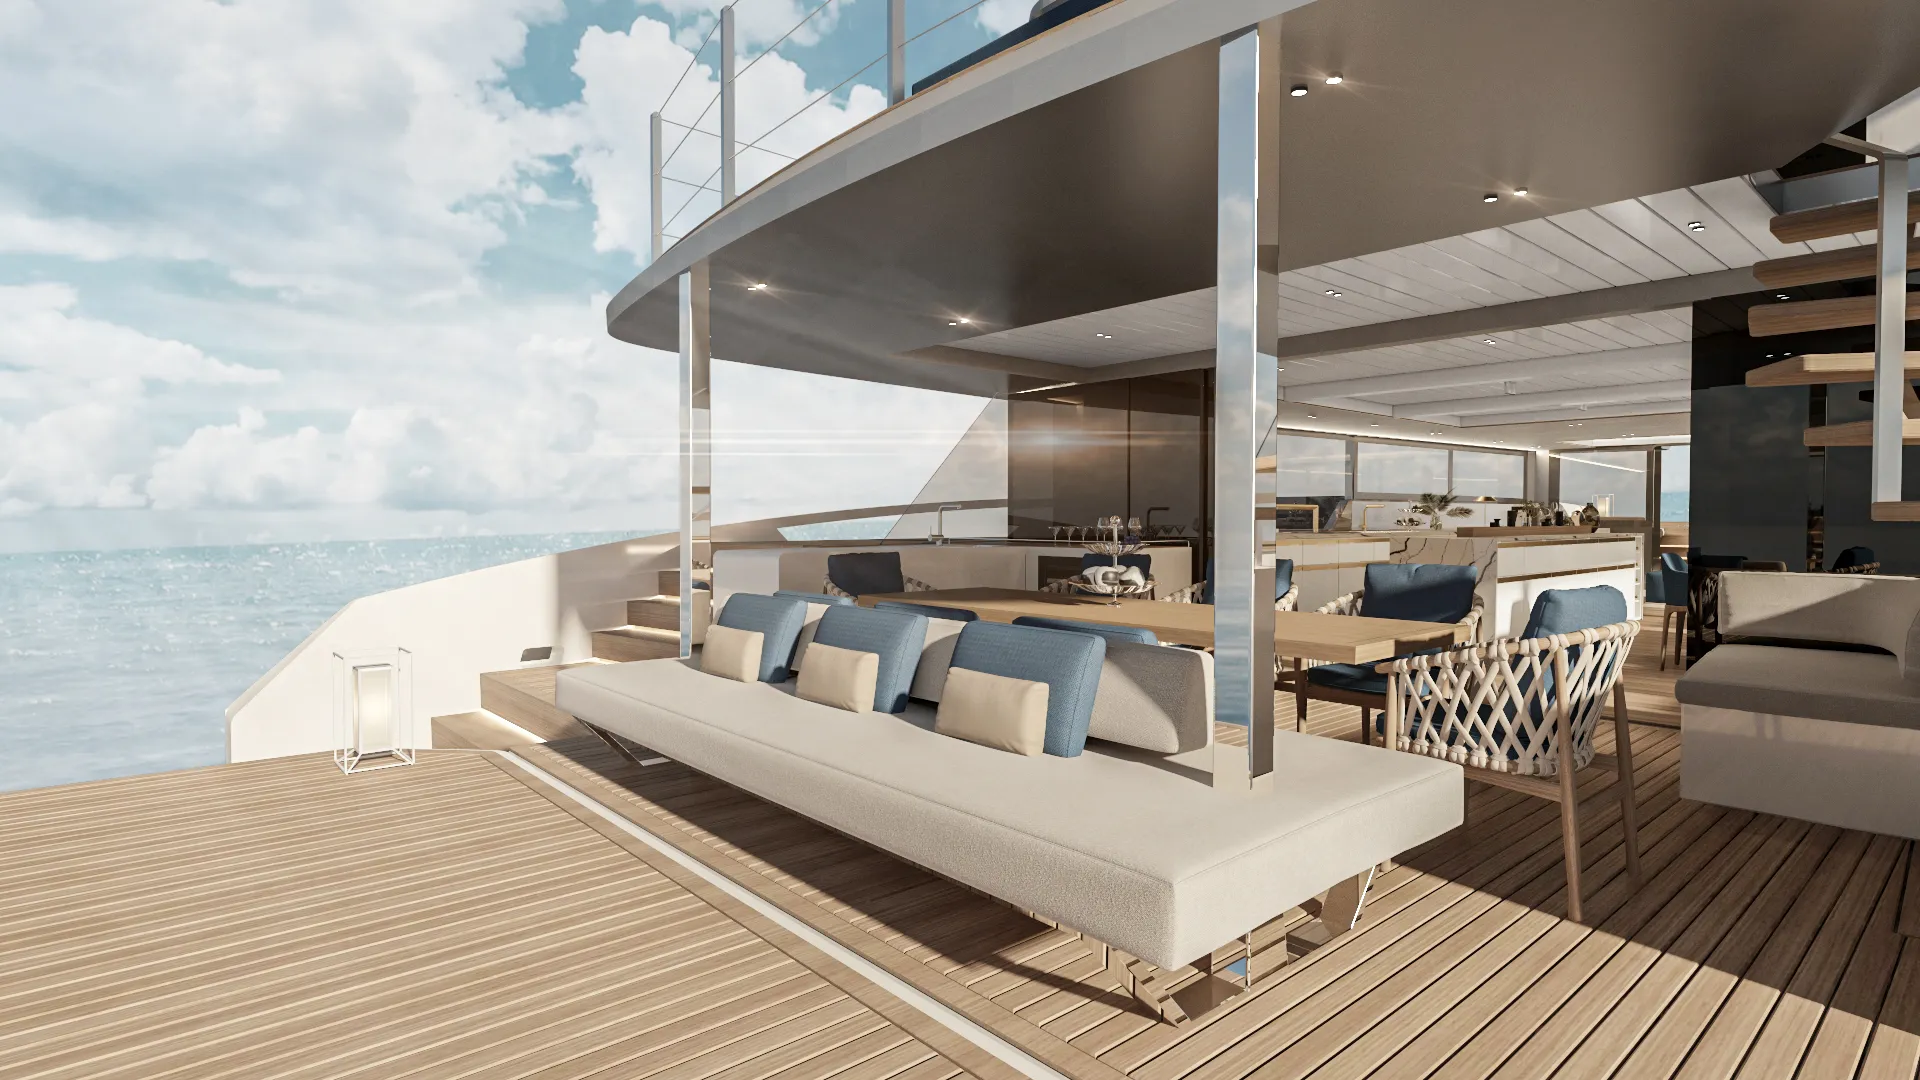 Exterior lounging area onboard the MC82p